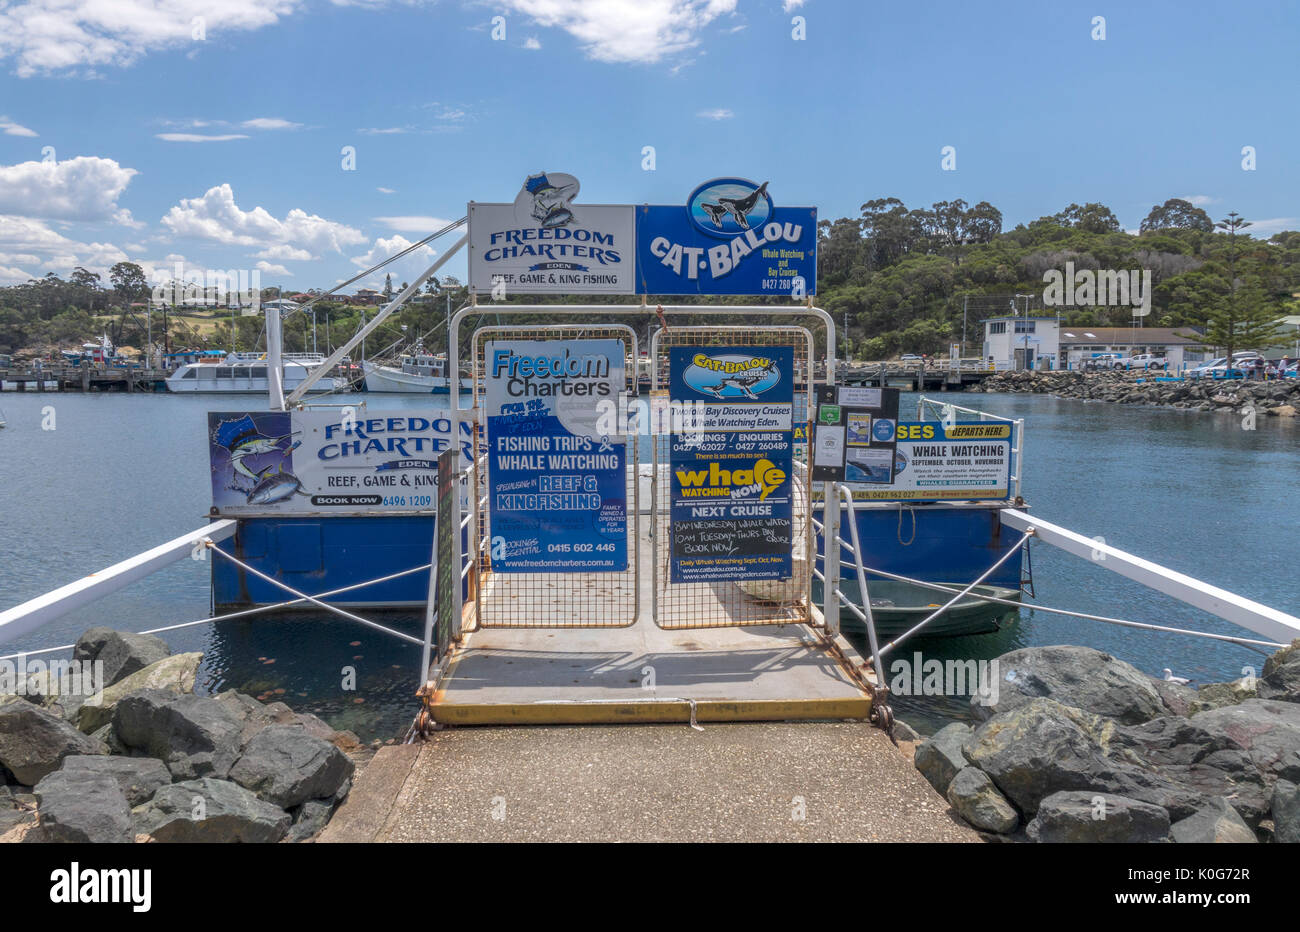 Freedom Charters And Cat Balou Fishing Charter And Whale Watching Private Pier Jetty In The Port Of Eden New South Wales Australia Stock Photo